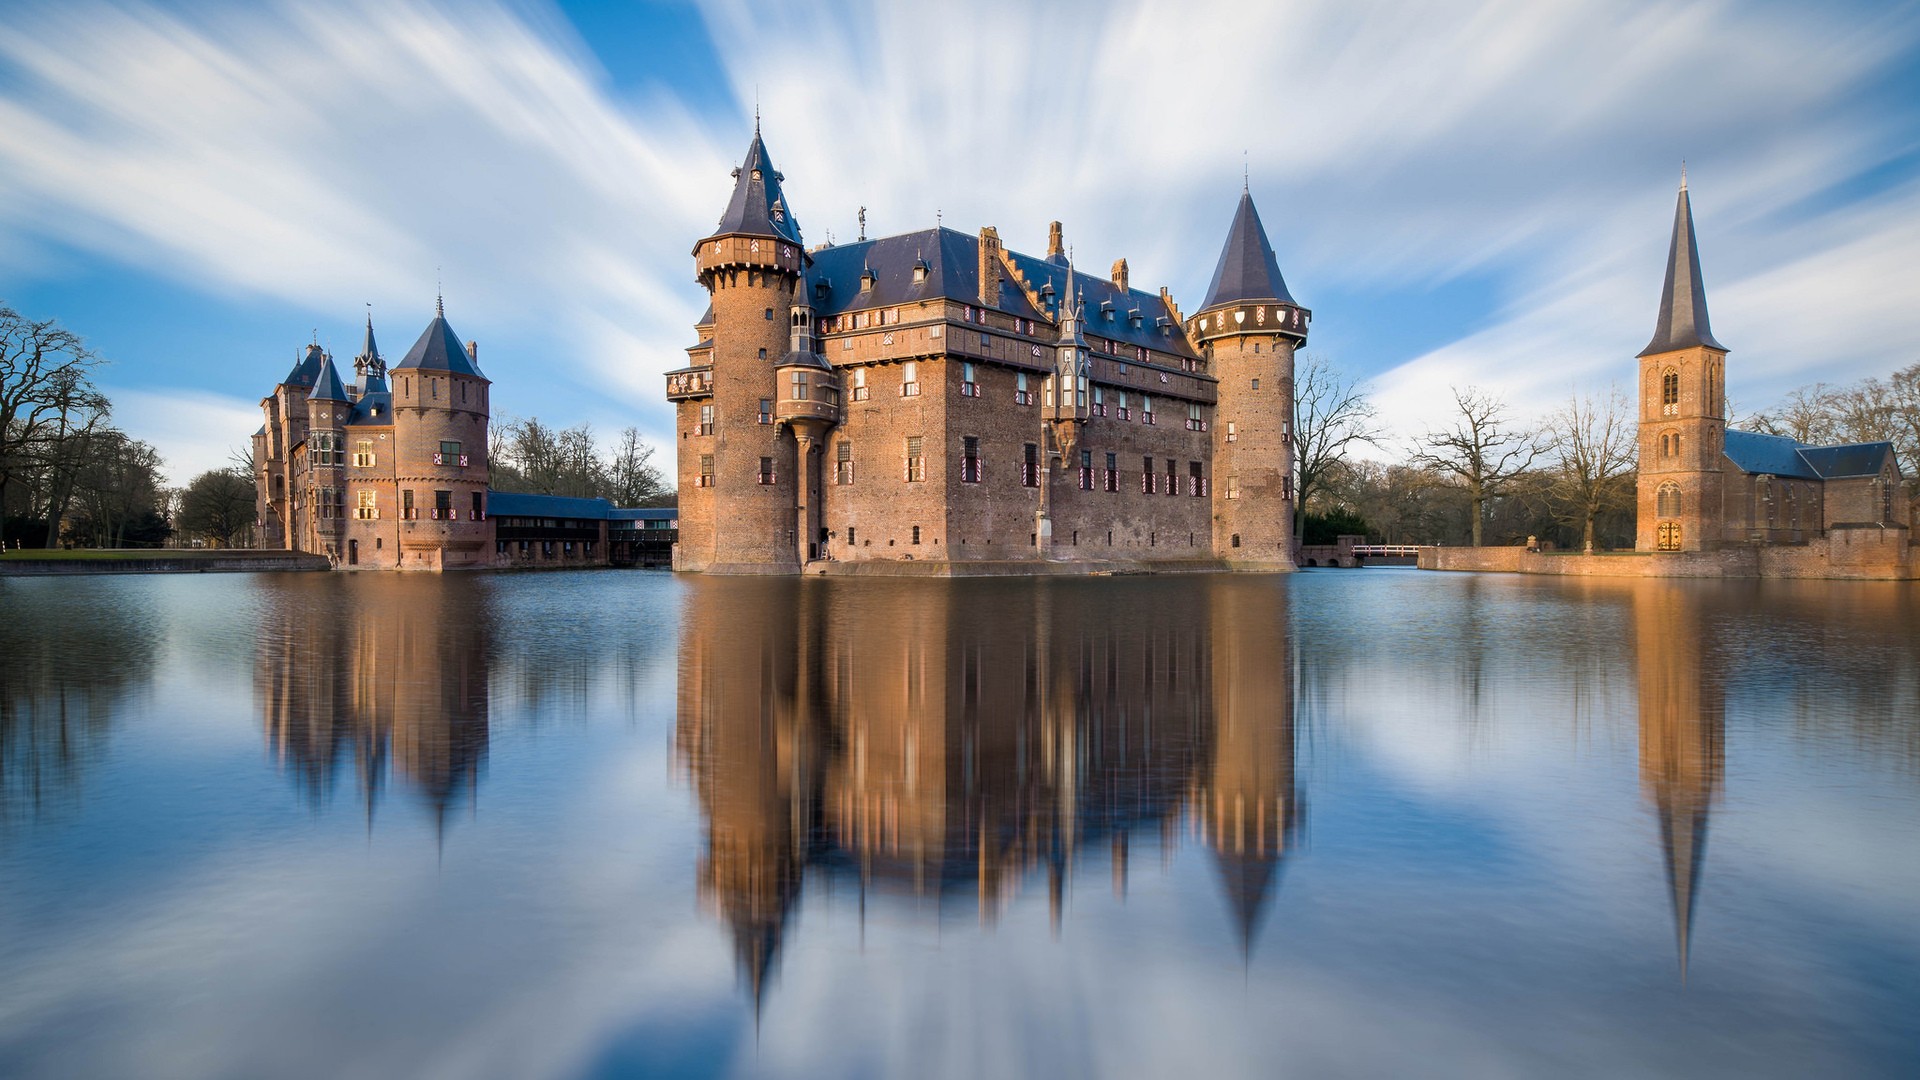 General 1920x1080 nature architecture castle clouds water reflection long exposure lights tower trees bridge Netherlands